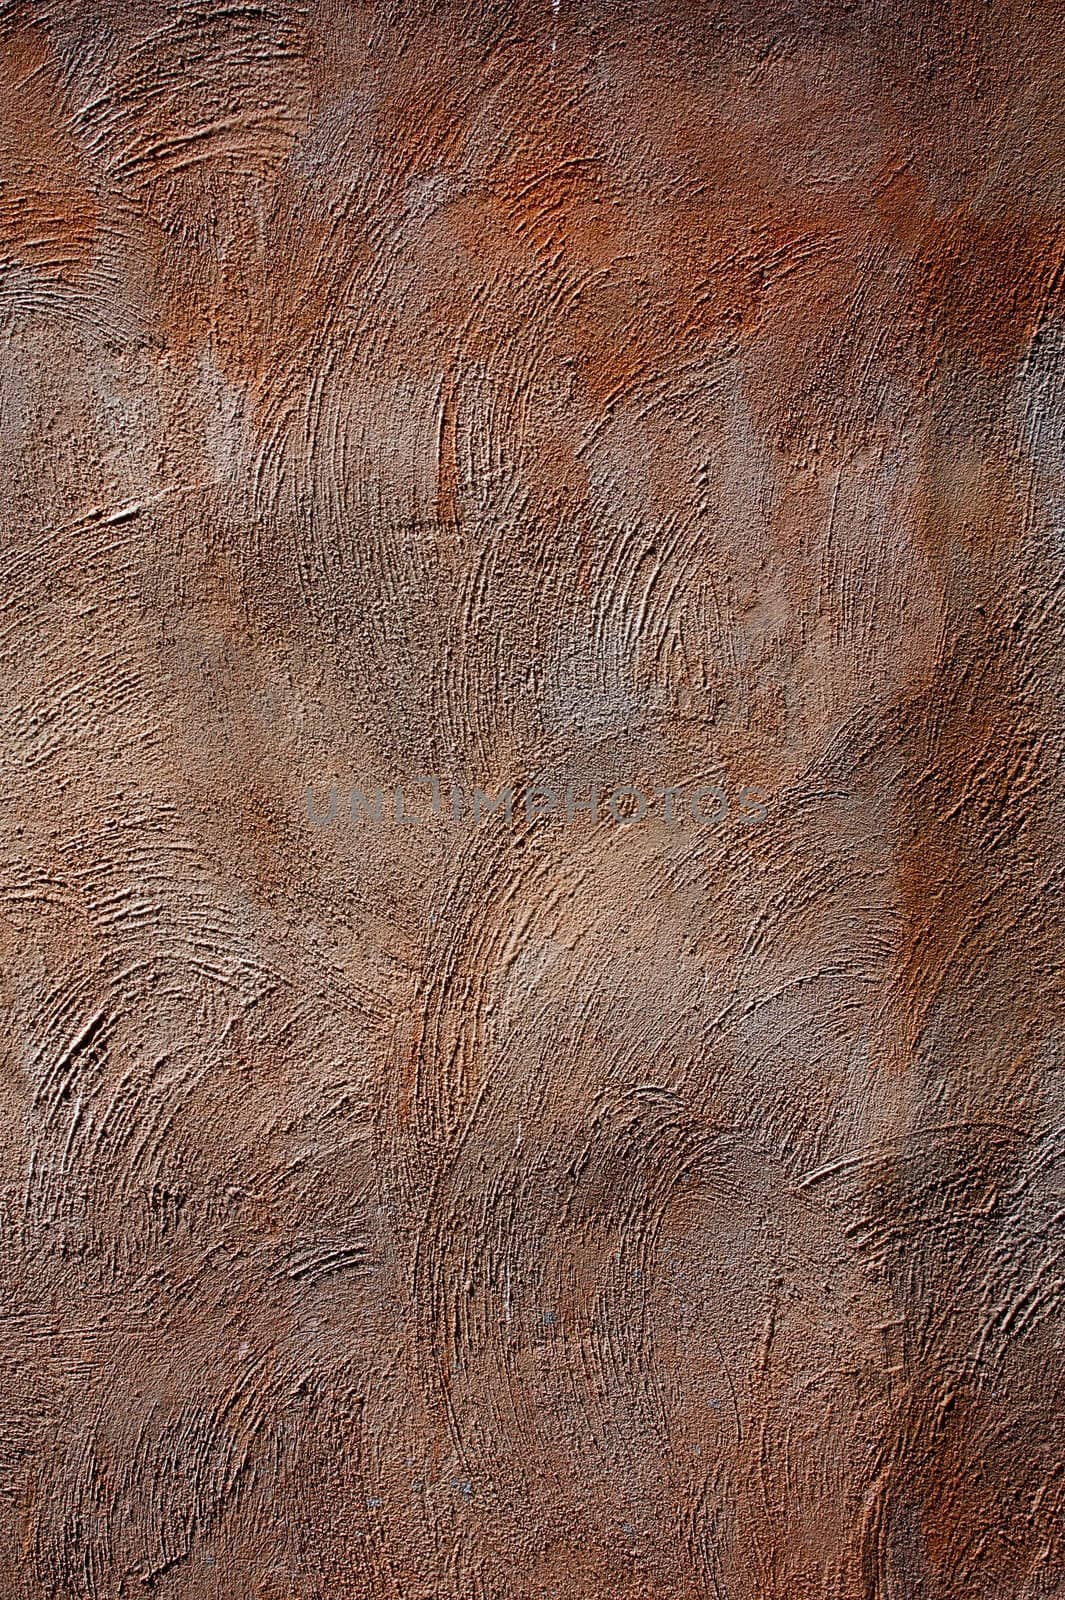 Orange old wall with many texture